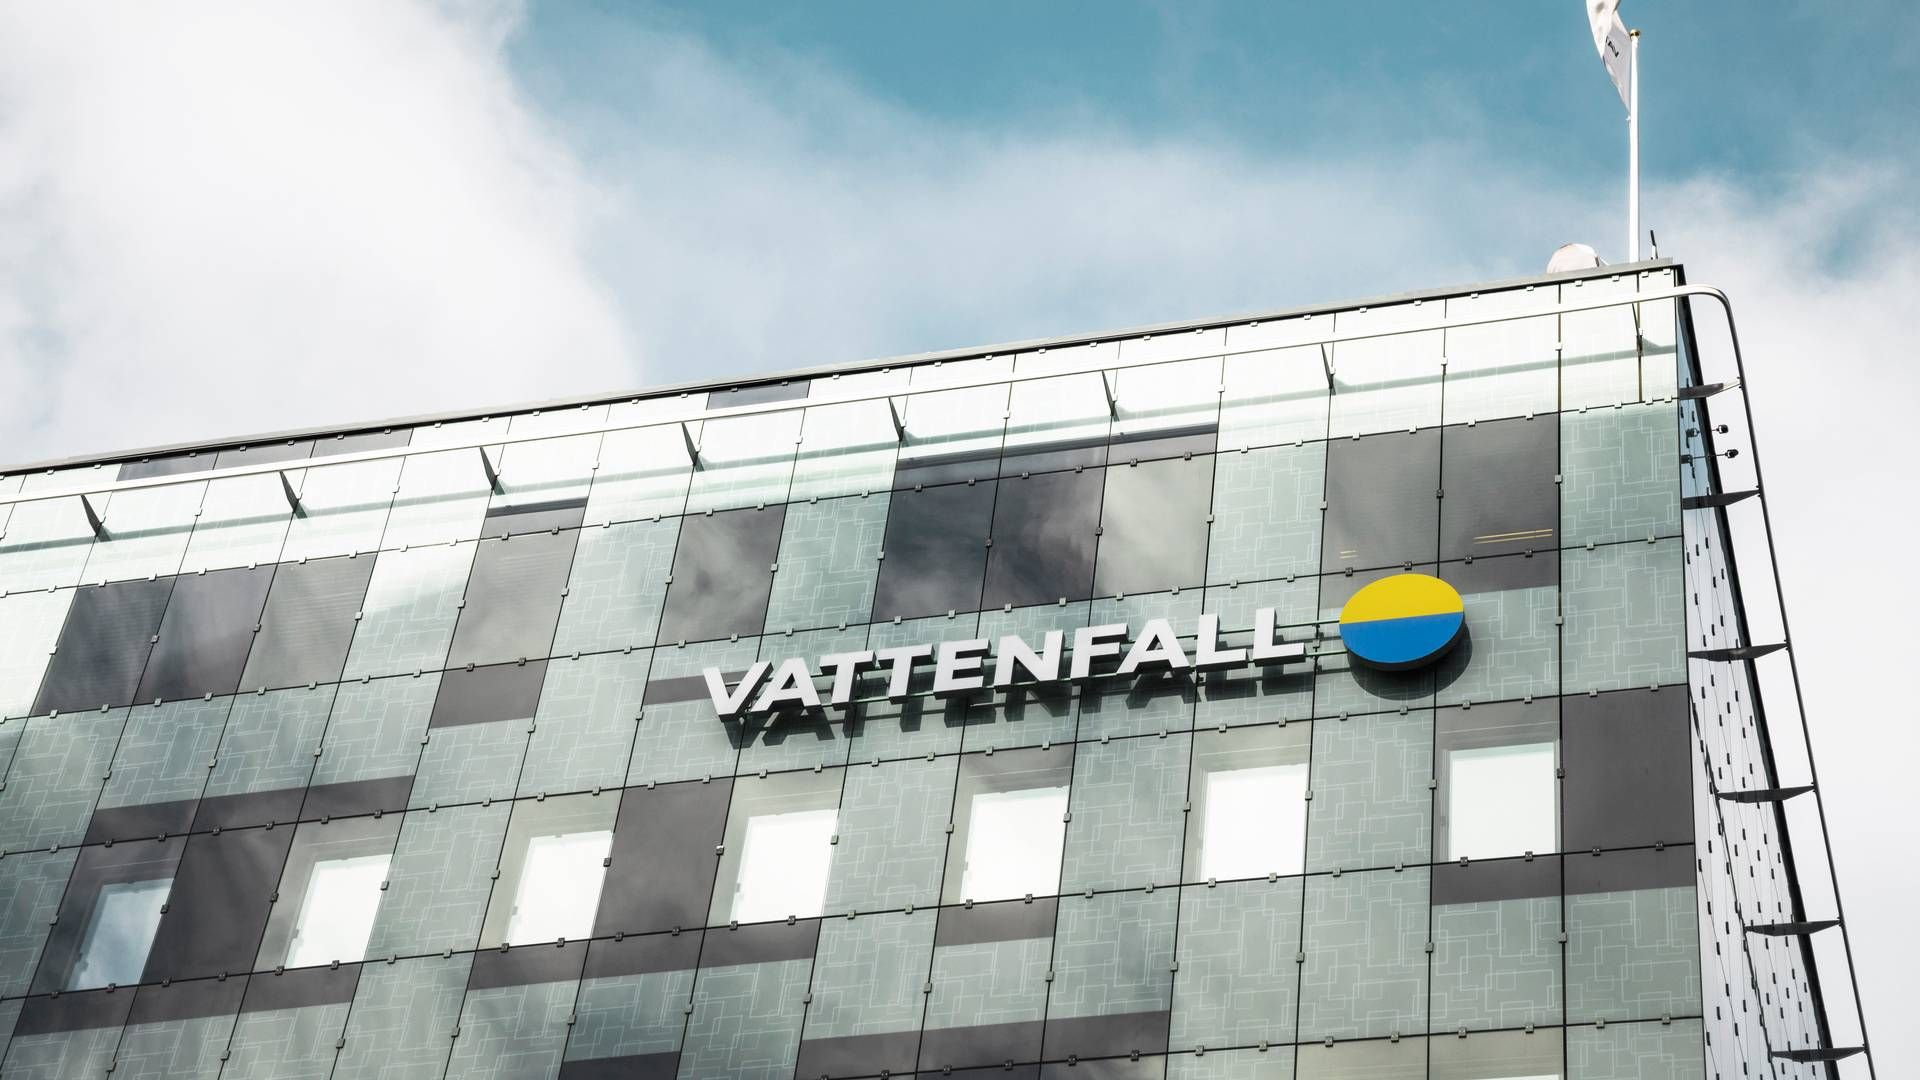 Vattenfall will probably have new bord members after the general meeting on April 26. | Photo: Vattenfall